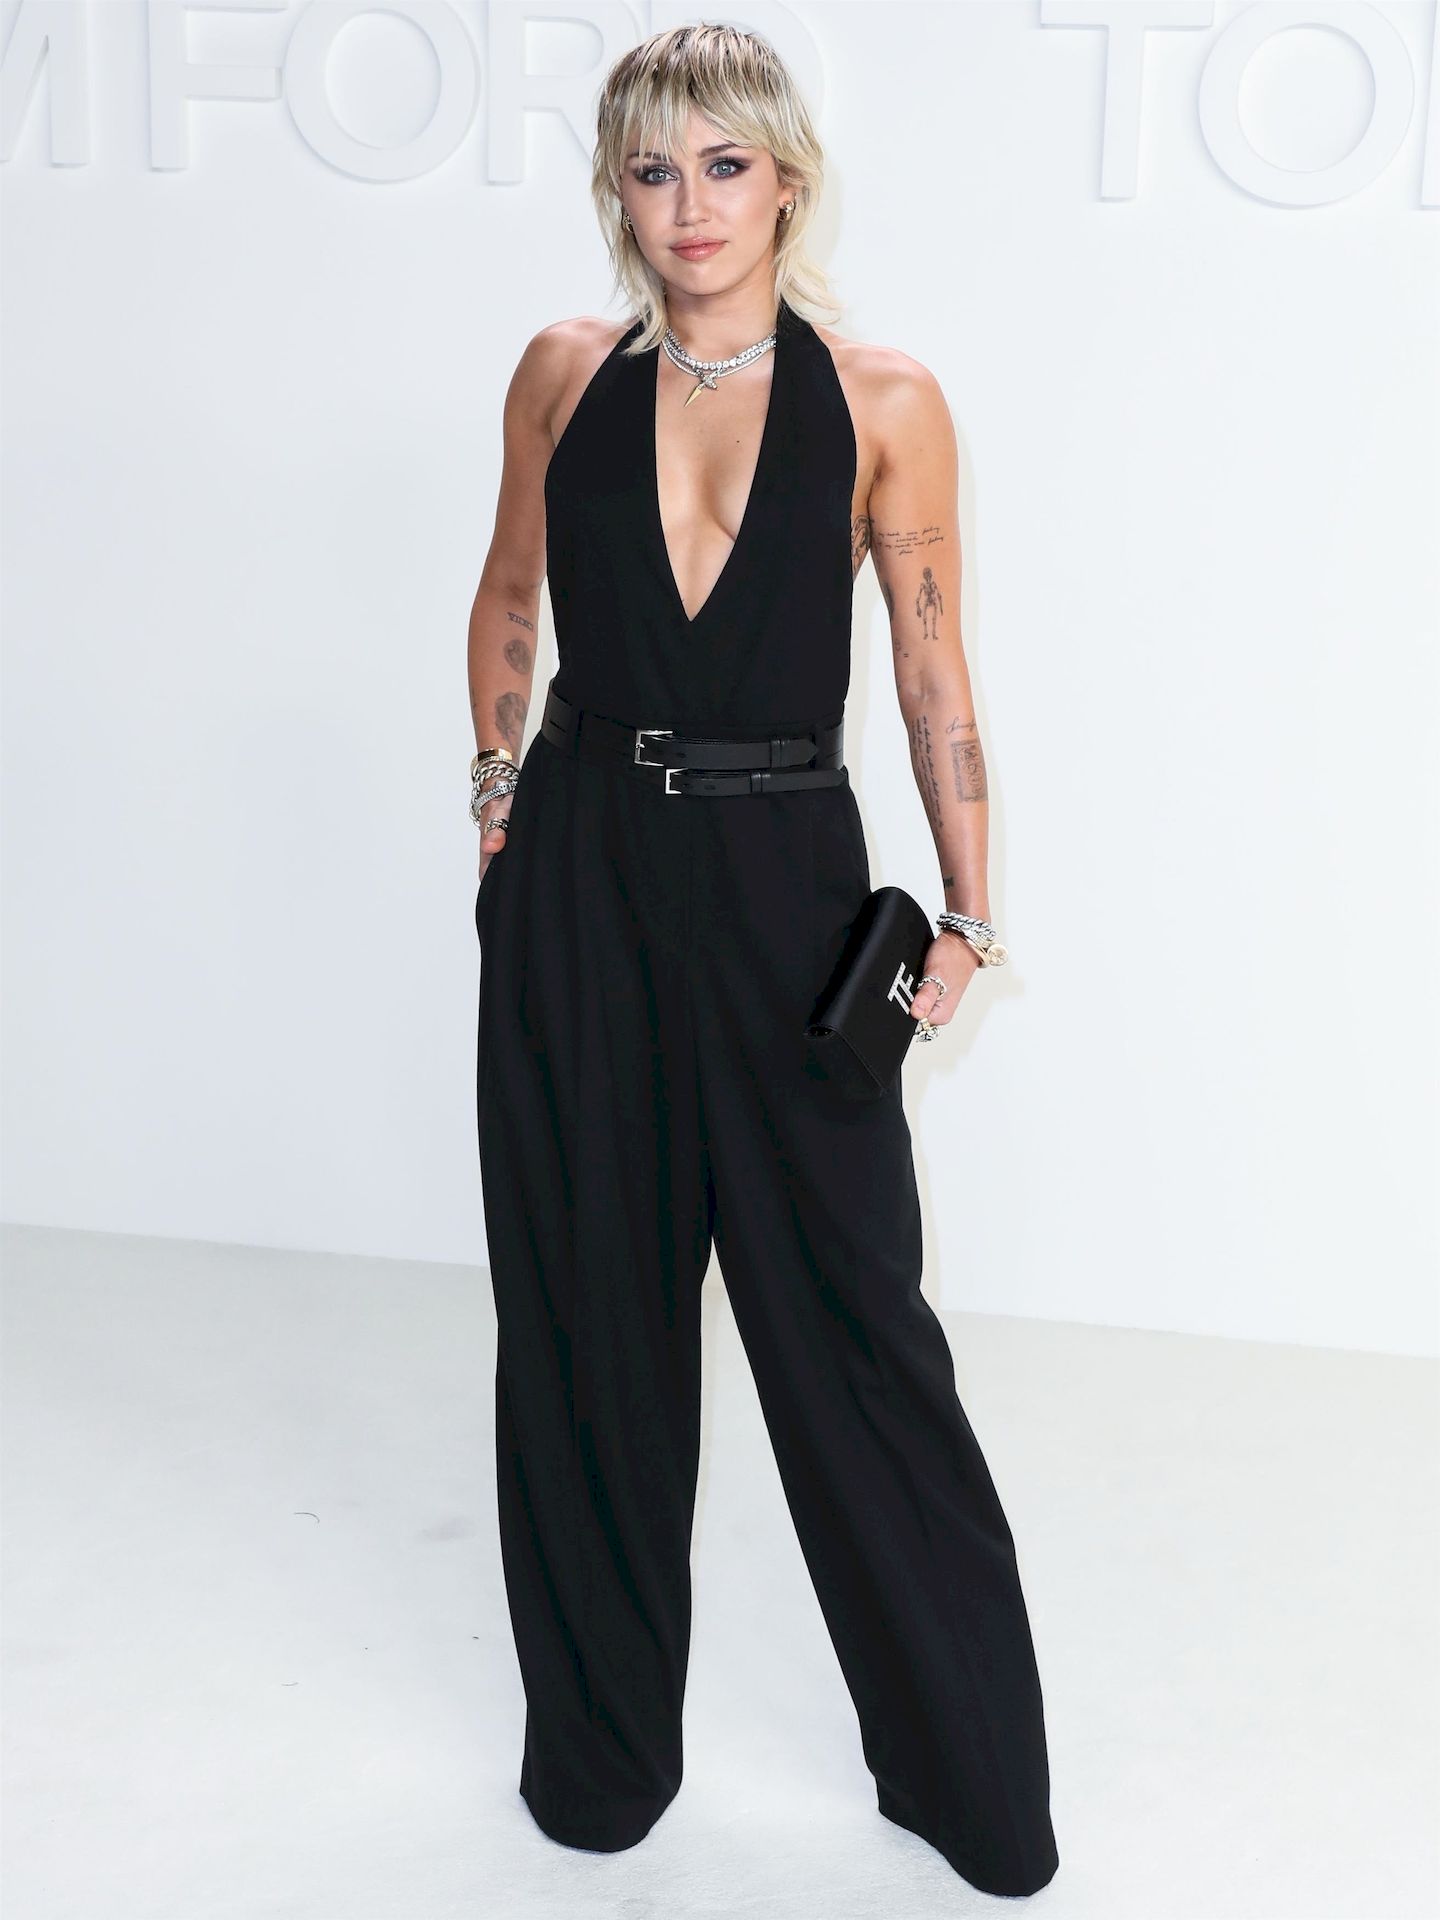 Miley-Cyrus-Looks-Sexy-at-the-Tom-Ford-Autumn_Winter-2020-Fashion-Show-0029.jpg